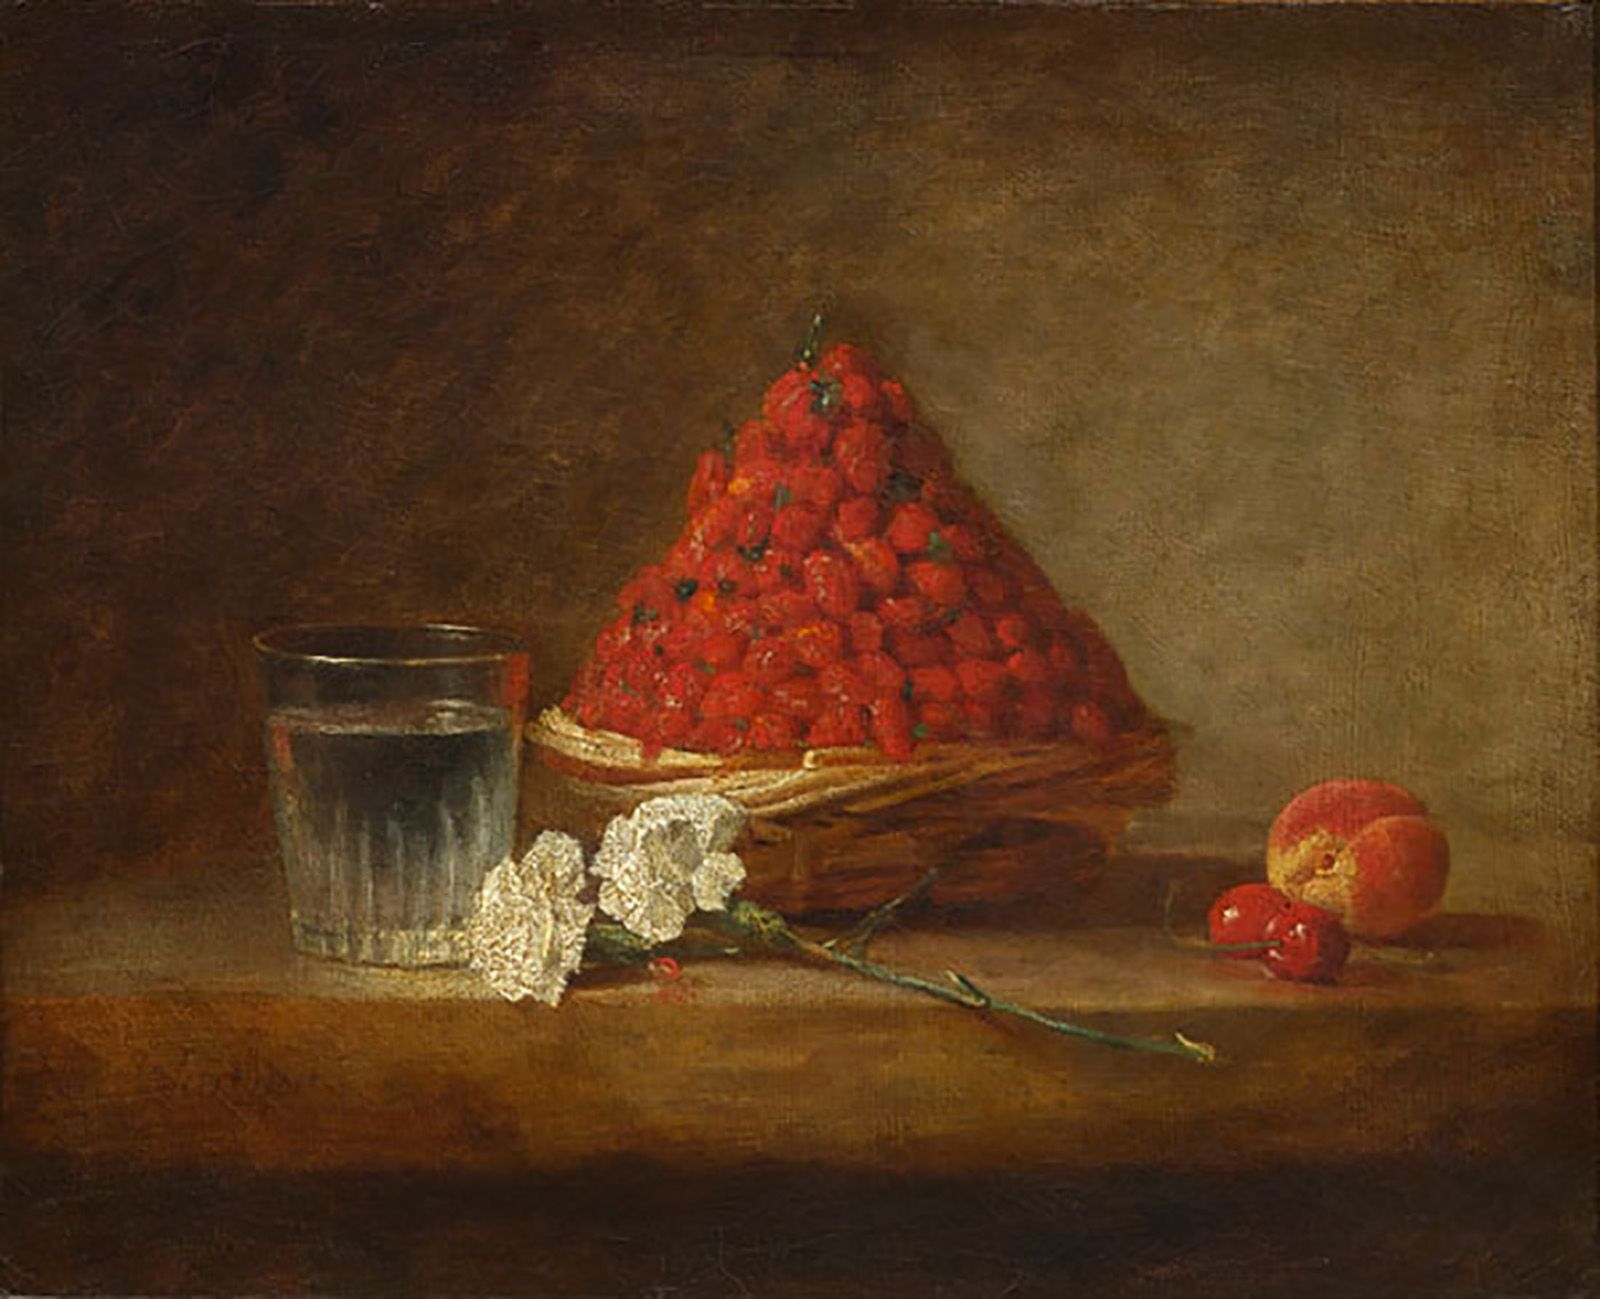 On 23rd March 2022, the Old Master & 19th Century Art department at Artcurial and the Cabinet Turquin will present for sale a masterpiece by Jean Siméon Chardin, the Basket of Wild Strawberries. Chardin painted approximately one hundred and twenty still lives and often depicted the same objects or fruits, in particular silver goblets, teapots, hares, plums, melons and peaches. This still life is the only one by the artist to feature strawberries as its main subject. - 

Jean-Siméon Chardin (1699-1779)
The Basket of Wild Strawberries
Oil on canvas
Signed 'Chardin' lower left
38 x 46 cm